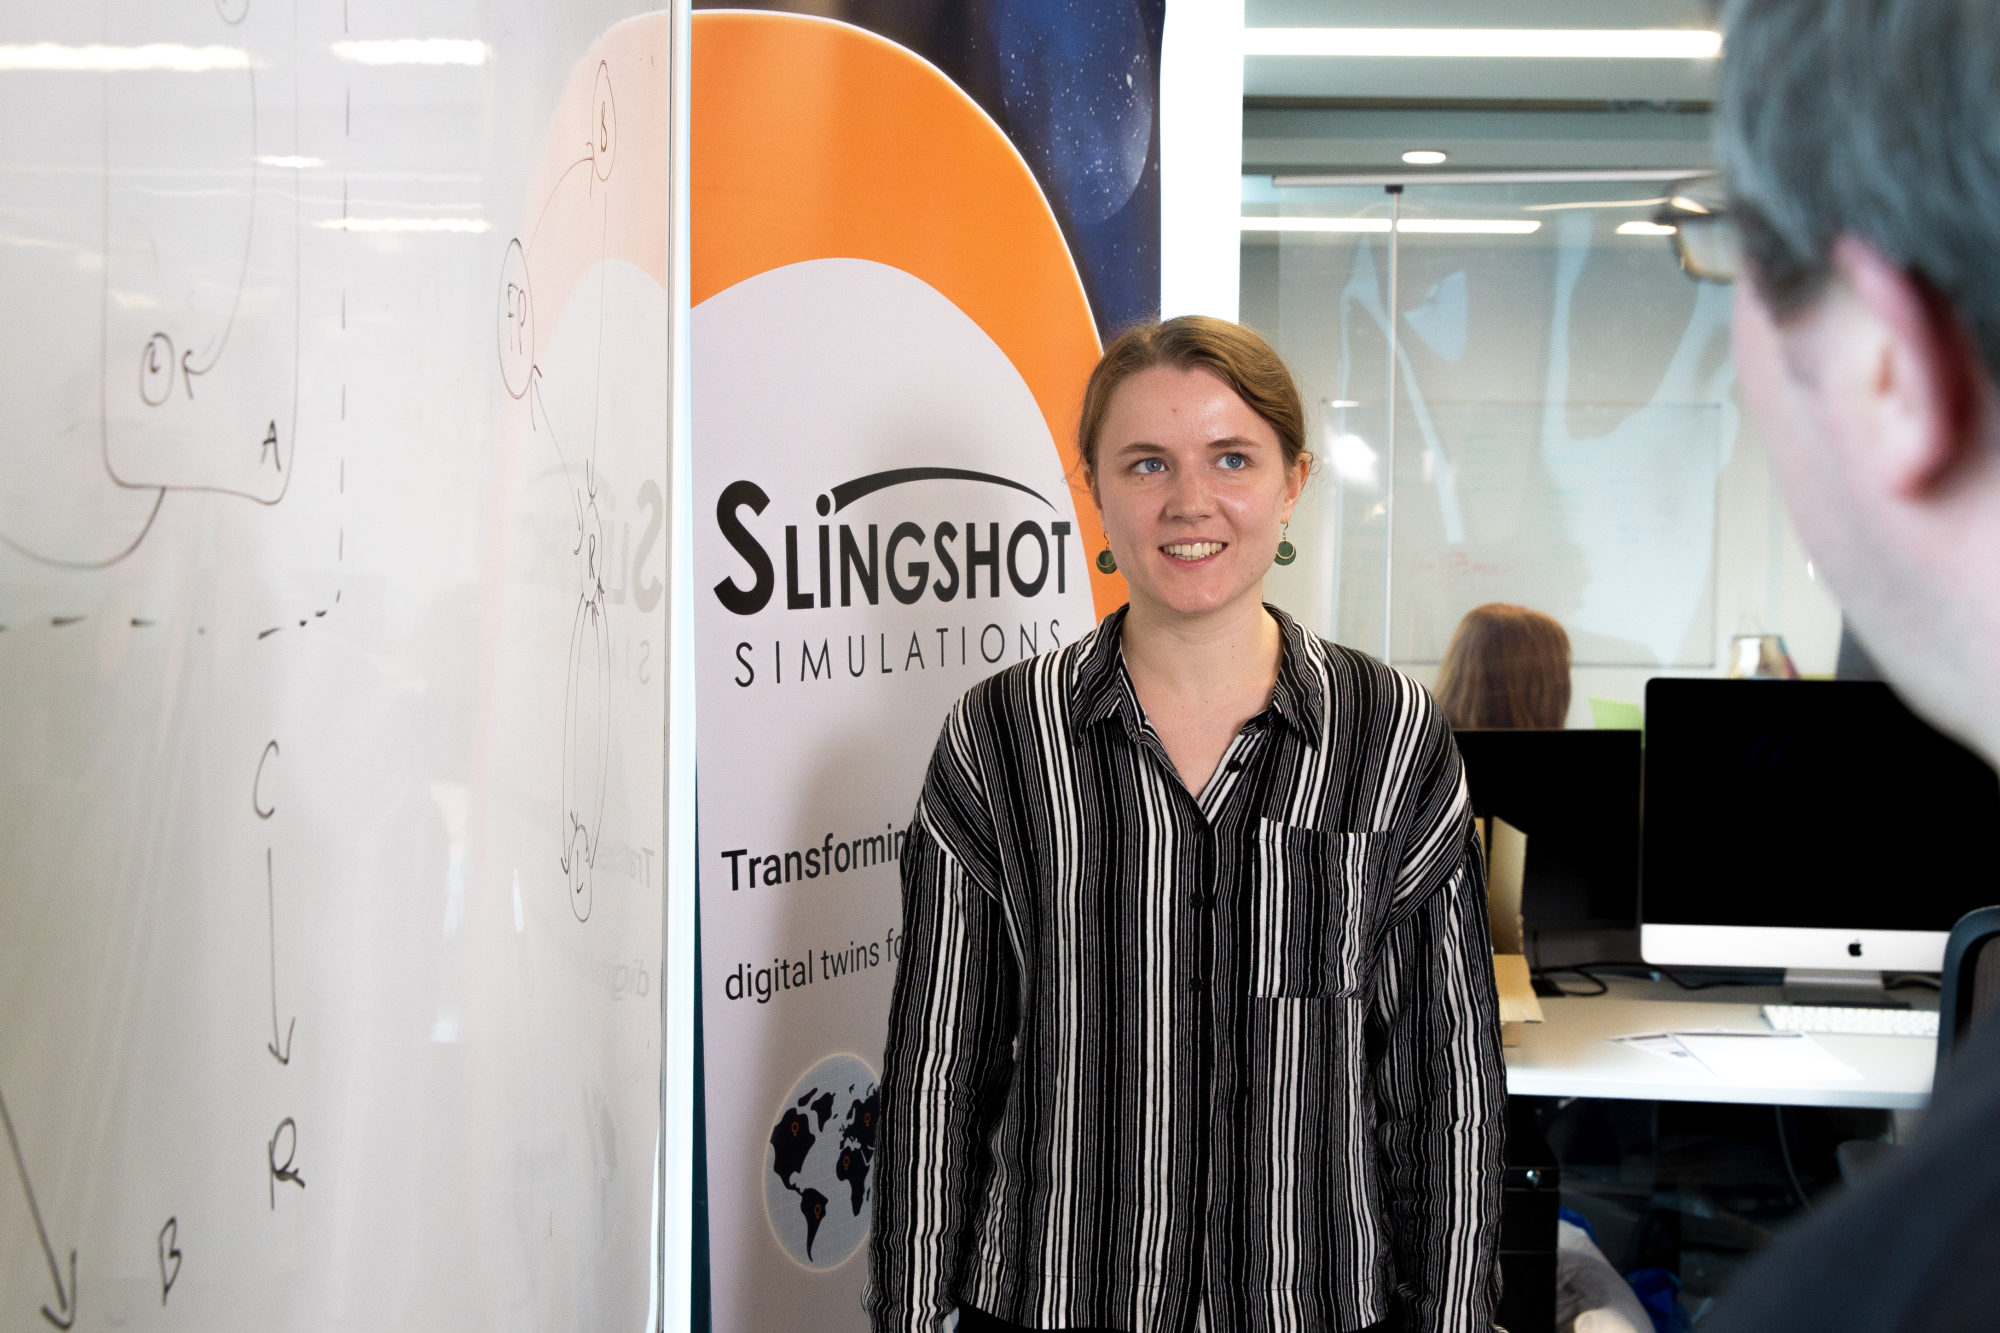 A female member of the Slingshot Simulations team standing in front of a company banner smiling and chatting to a male employee.